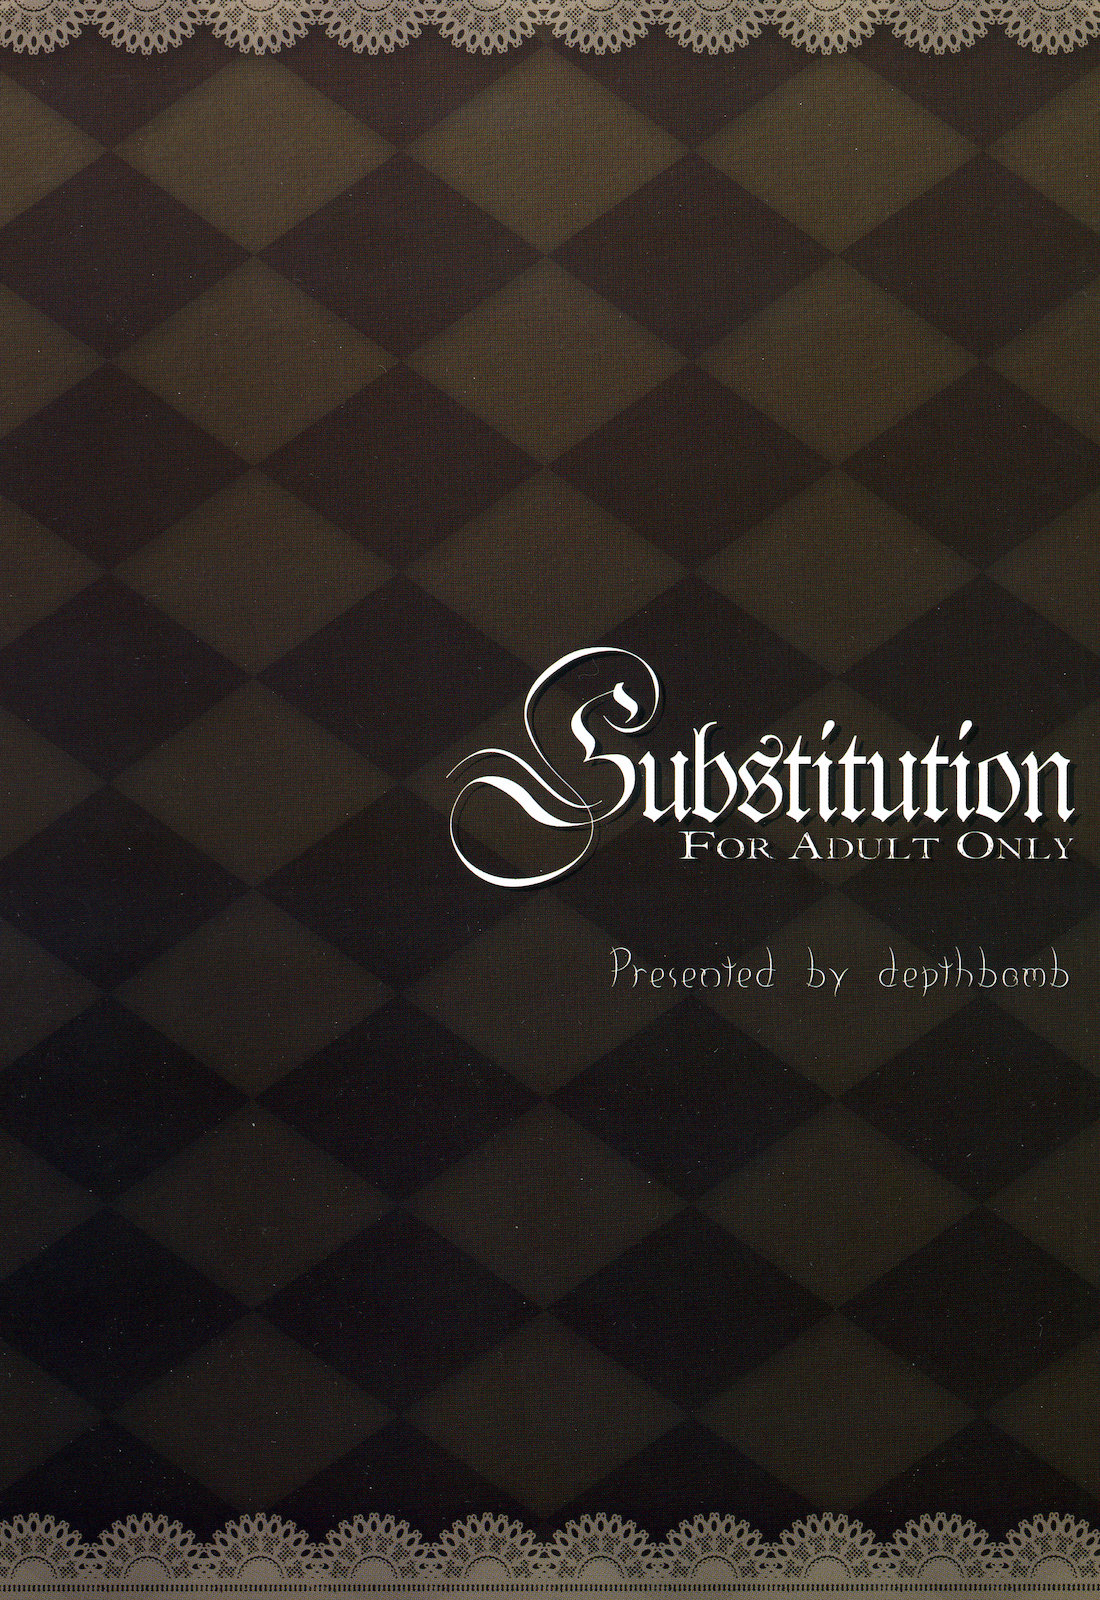 (C79) [Depthbomb (霜)] Substitution (東方Project)